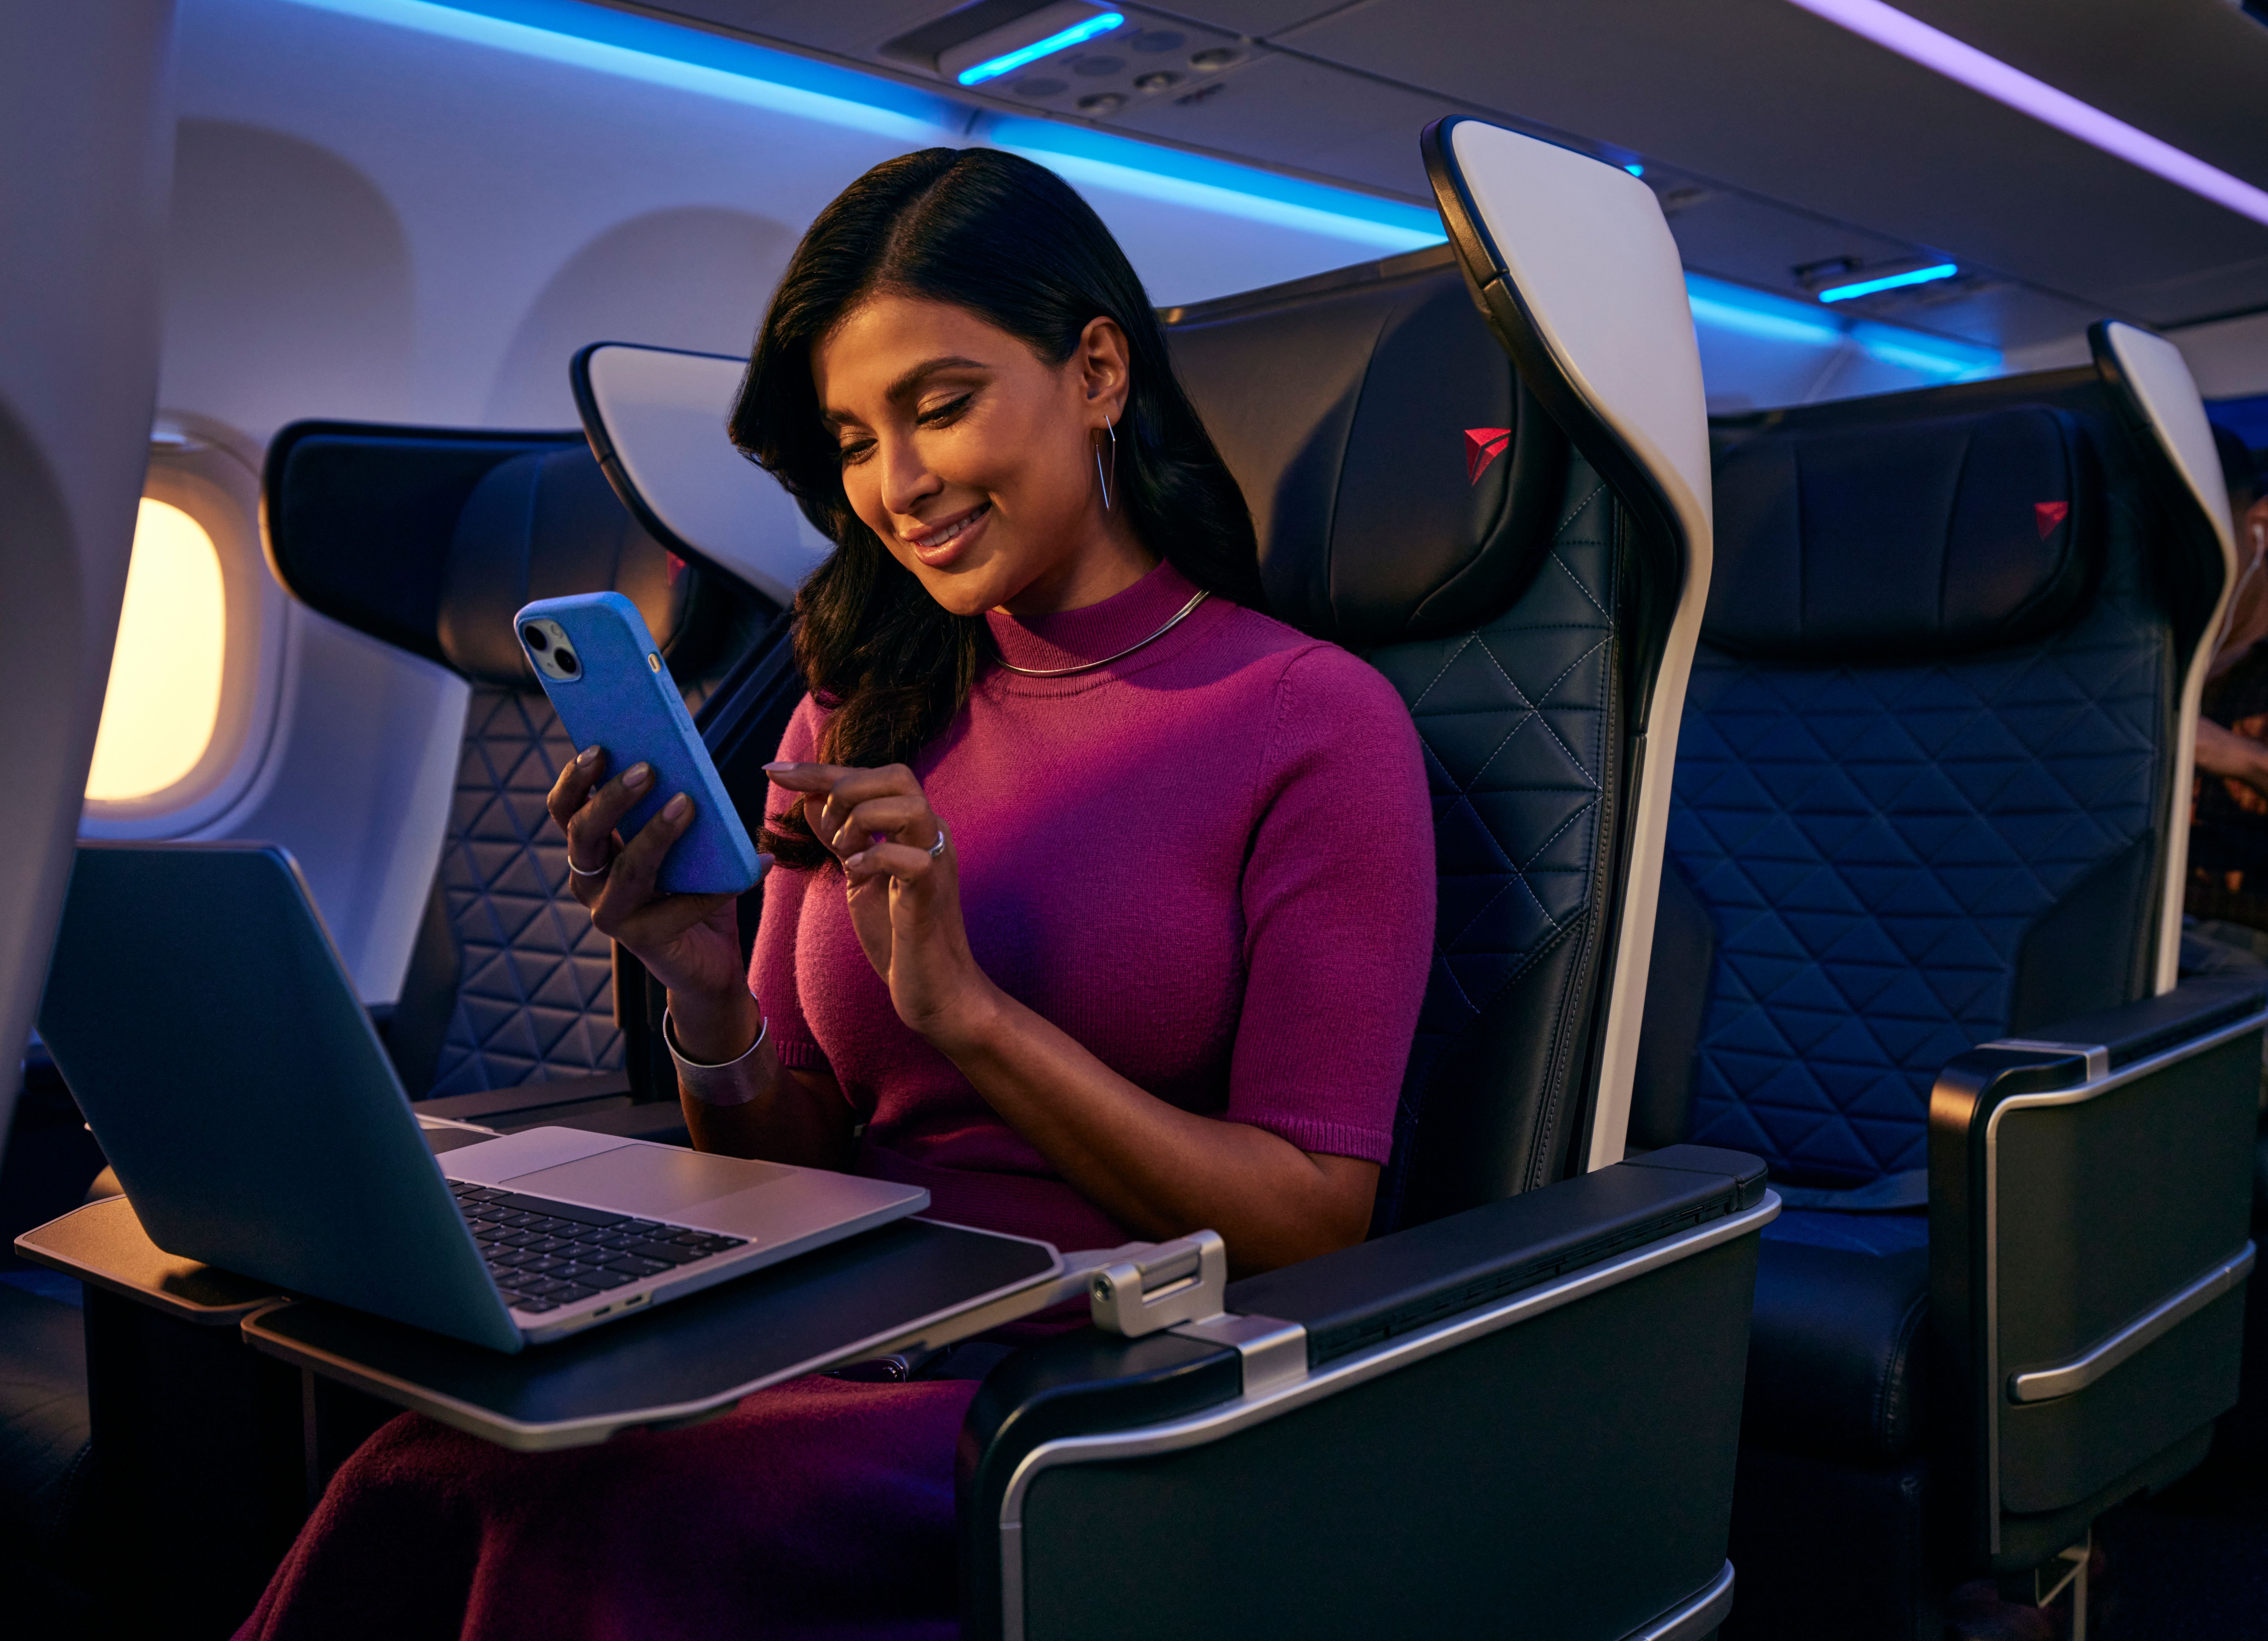 Delta Air Lines onboard WiFi